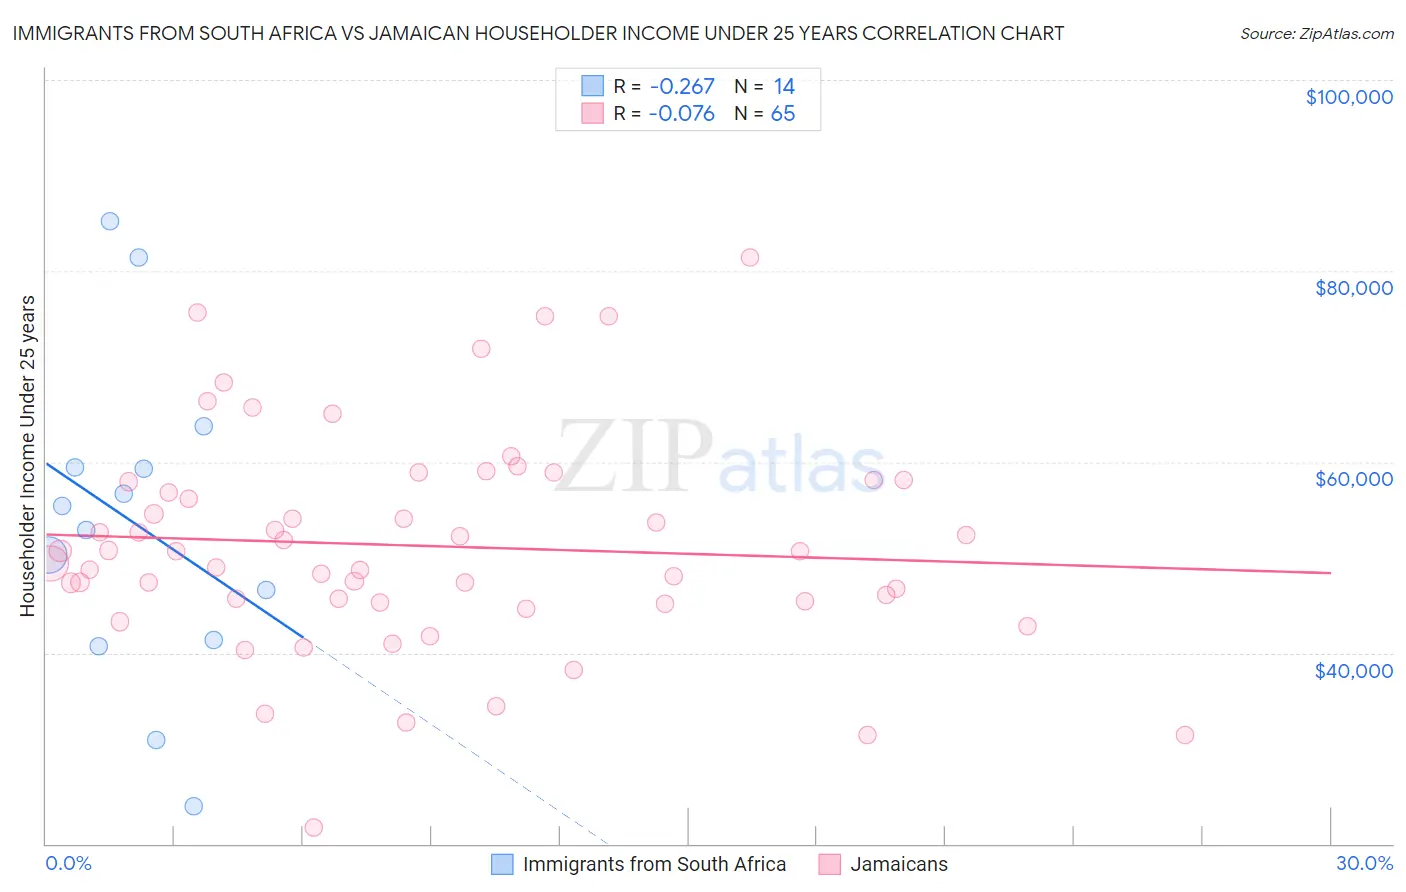 Immigrants from South Africa vs Jamaican Householder Income Under 25 years